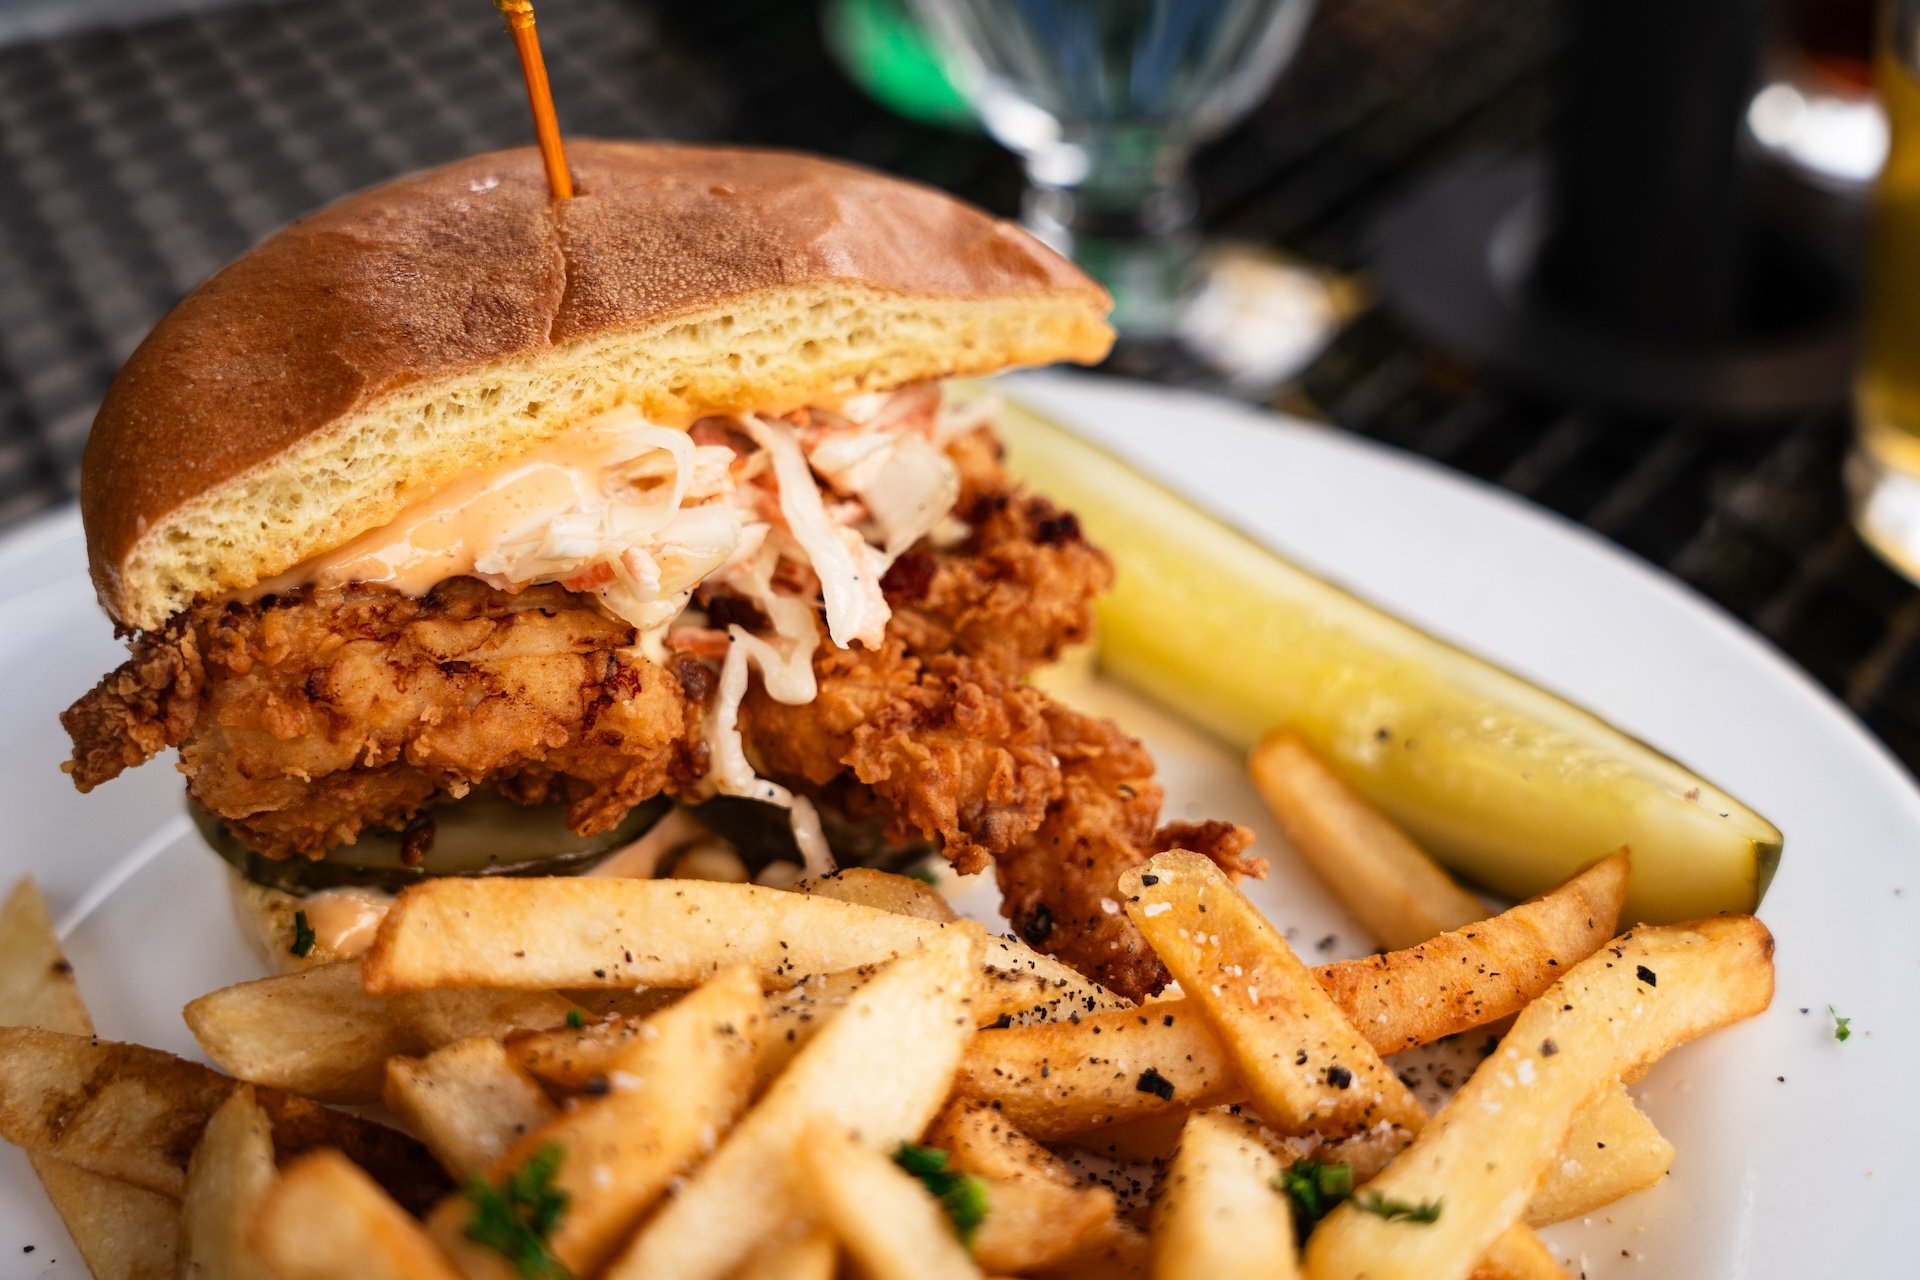 Fried chicken sandwich at Campbell's Place is a must for lunch